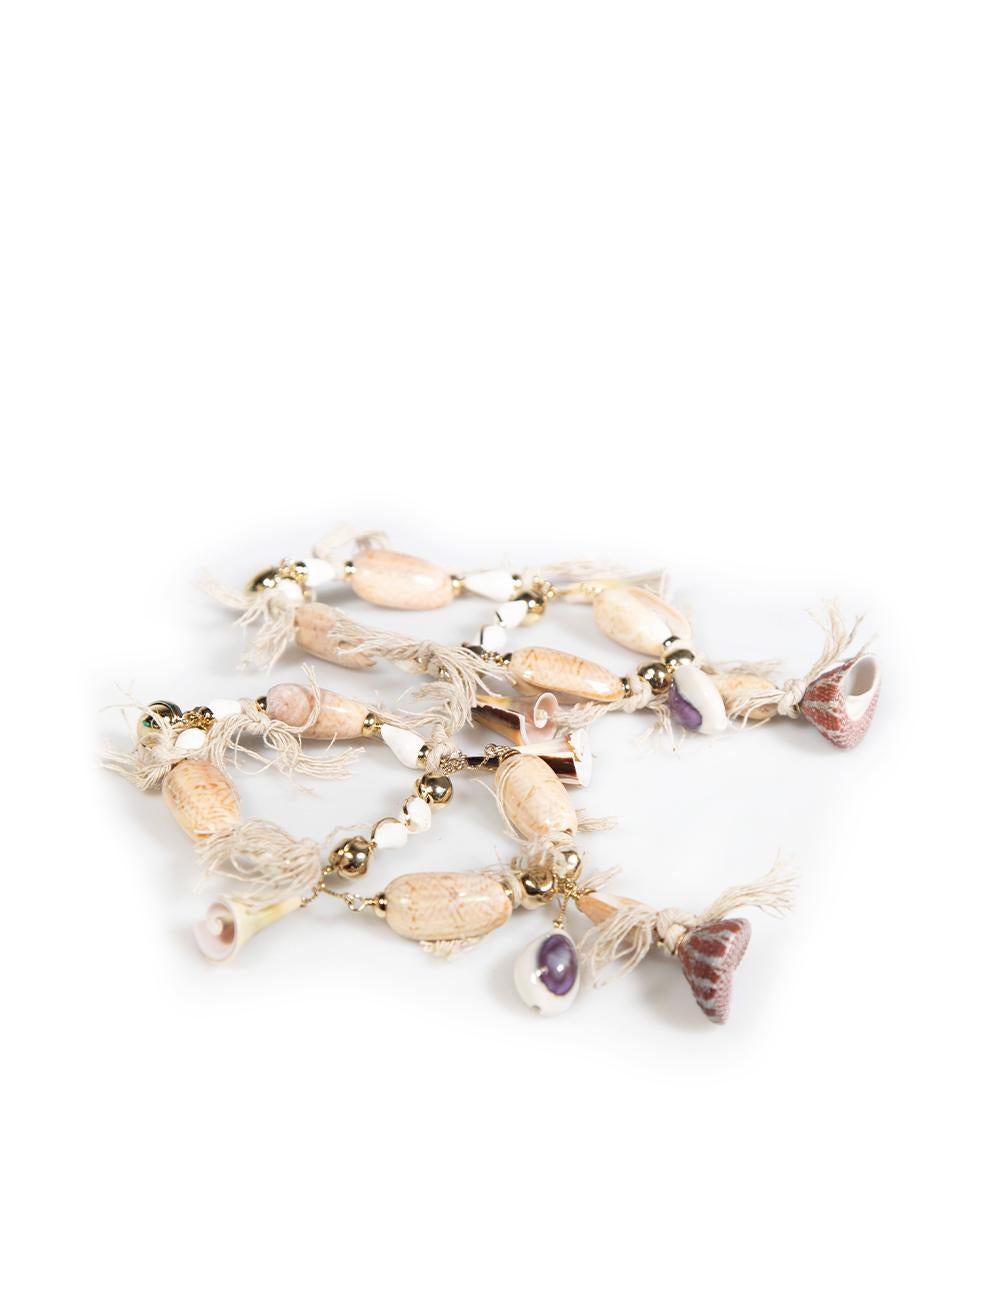 CONDITION is Never worn, with tags. No visible wear to earrings is evident on this new Chloé designer resale item. There is a gemstone missing from a lower shell due to poor storage.
 
Details
Beige
Seashell
Earrings
Gold beaded detail
 
Made in